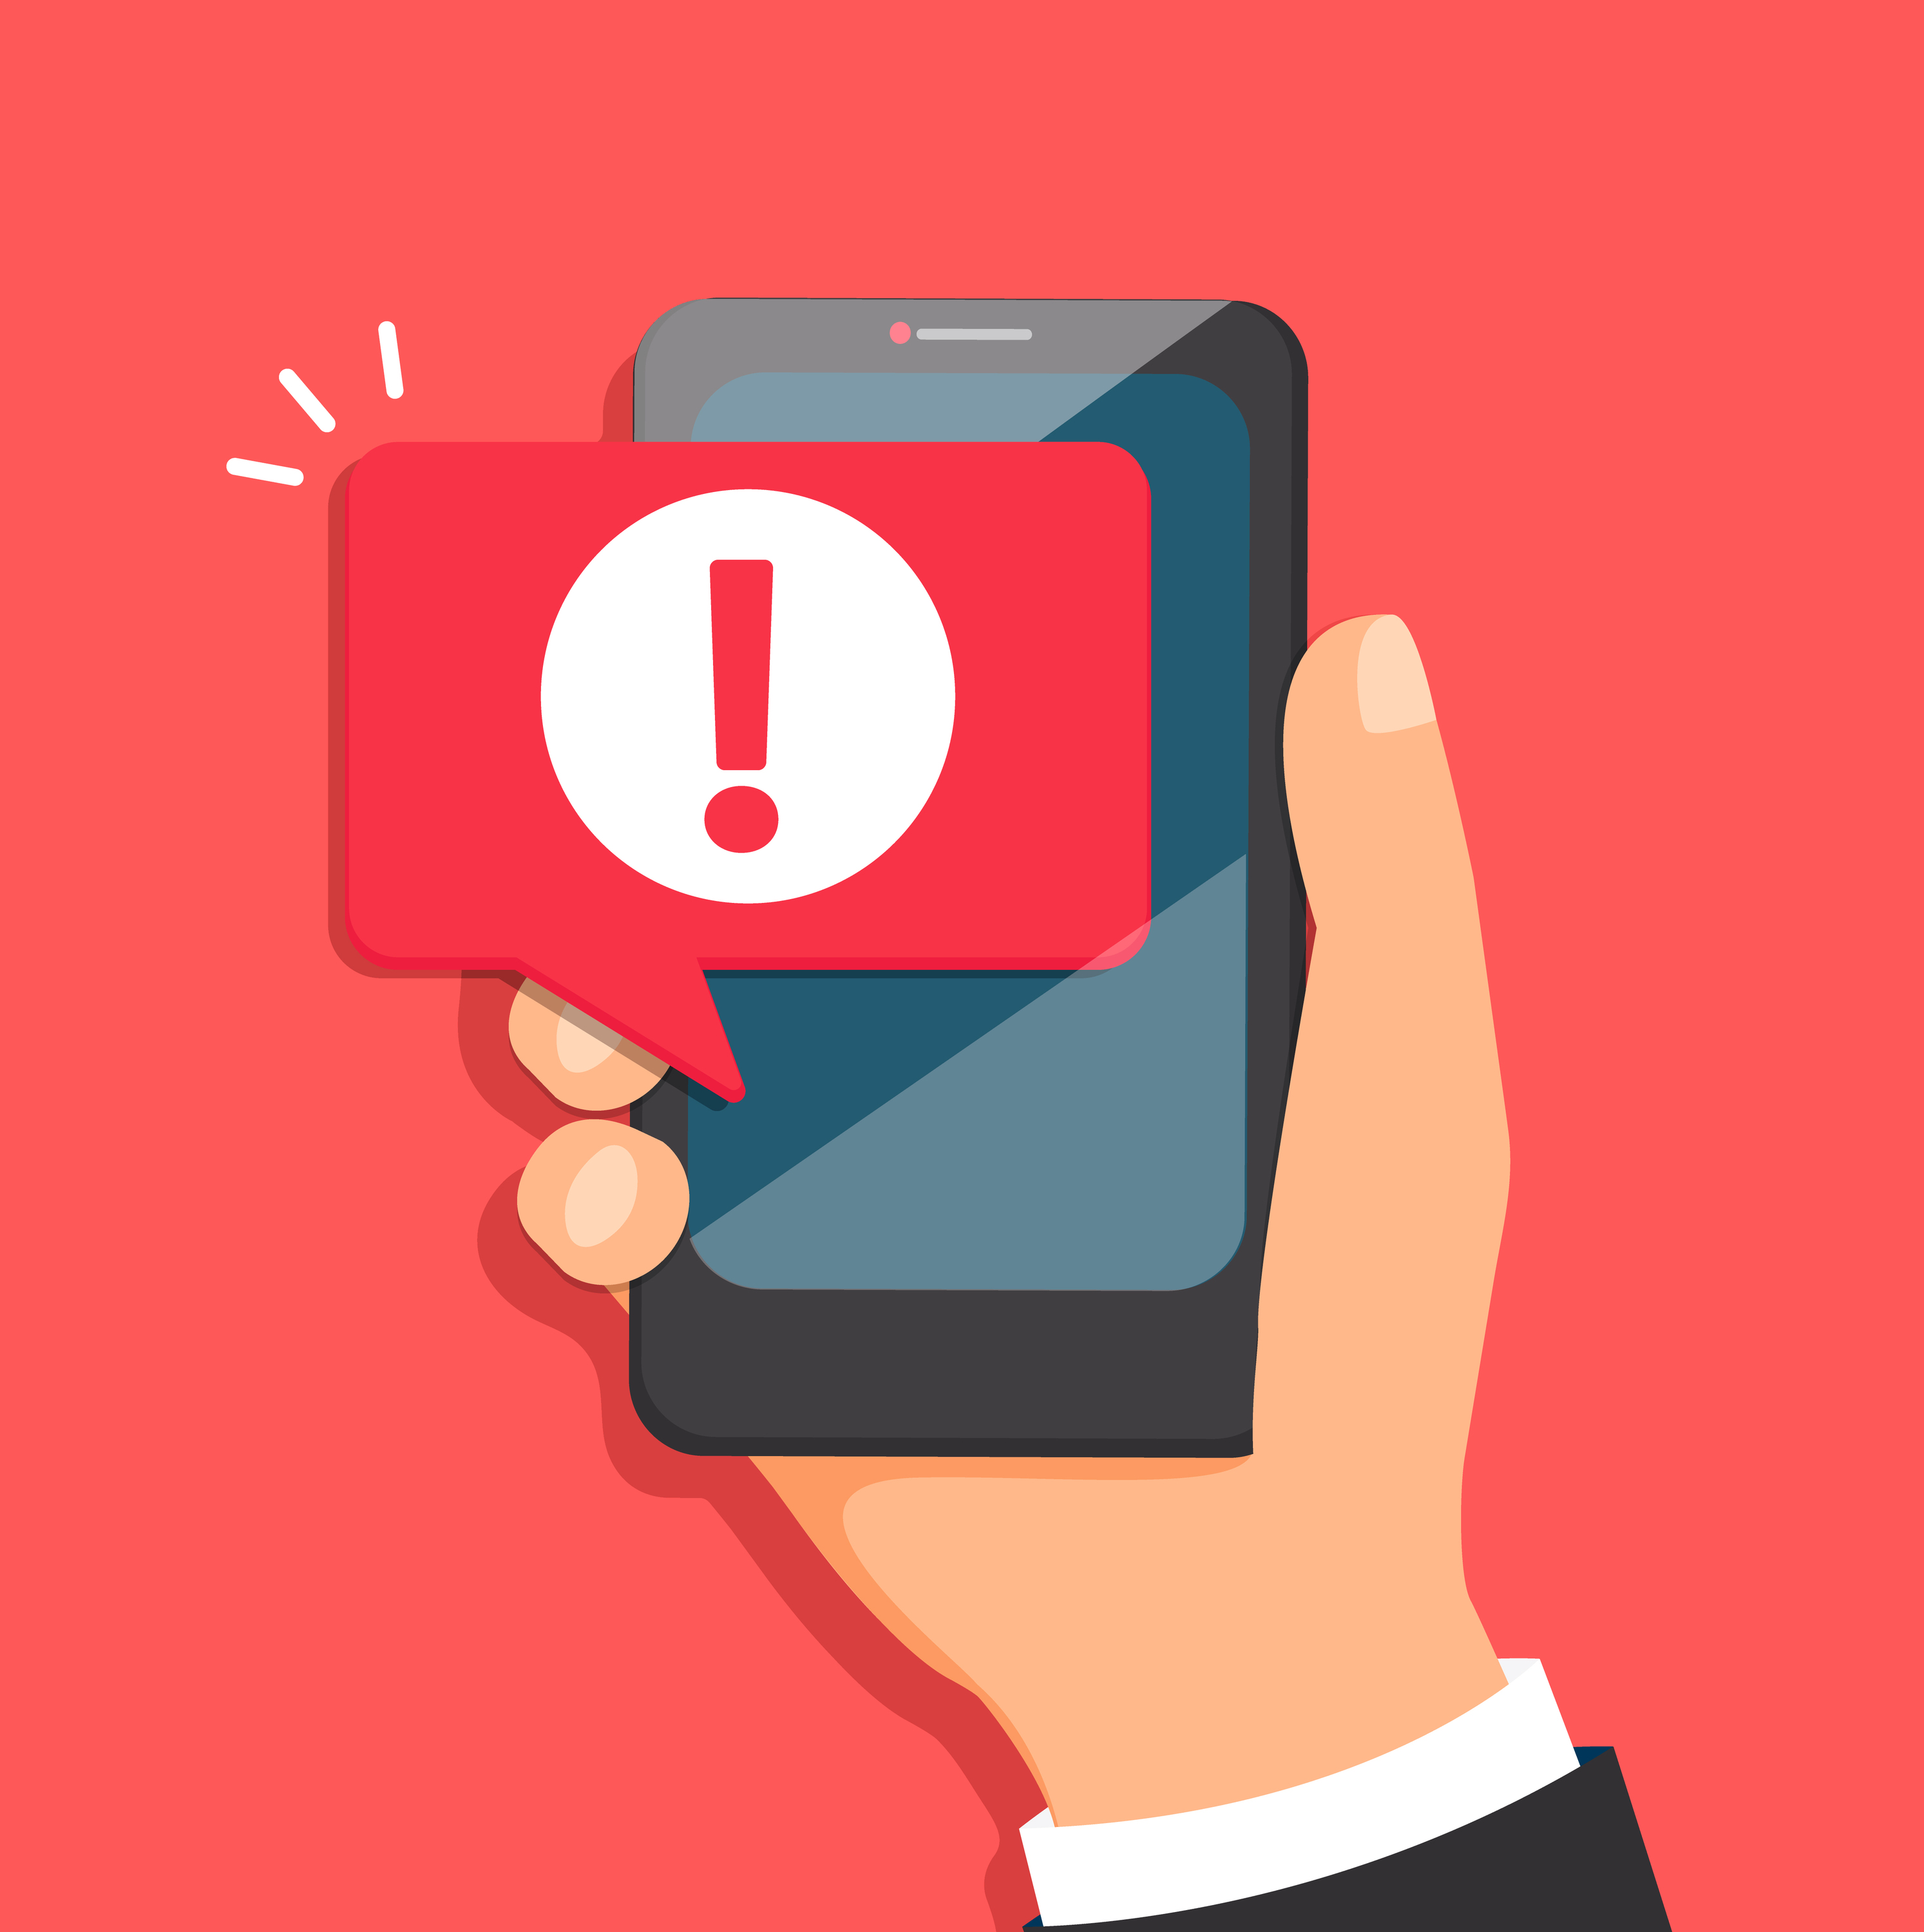 Concept of malware notification or error in mobile phone. Attention message bubble in smartphone. Red alert warning of spam data, insecure connection, scam, virus. Vector illustration.